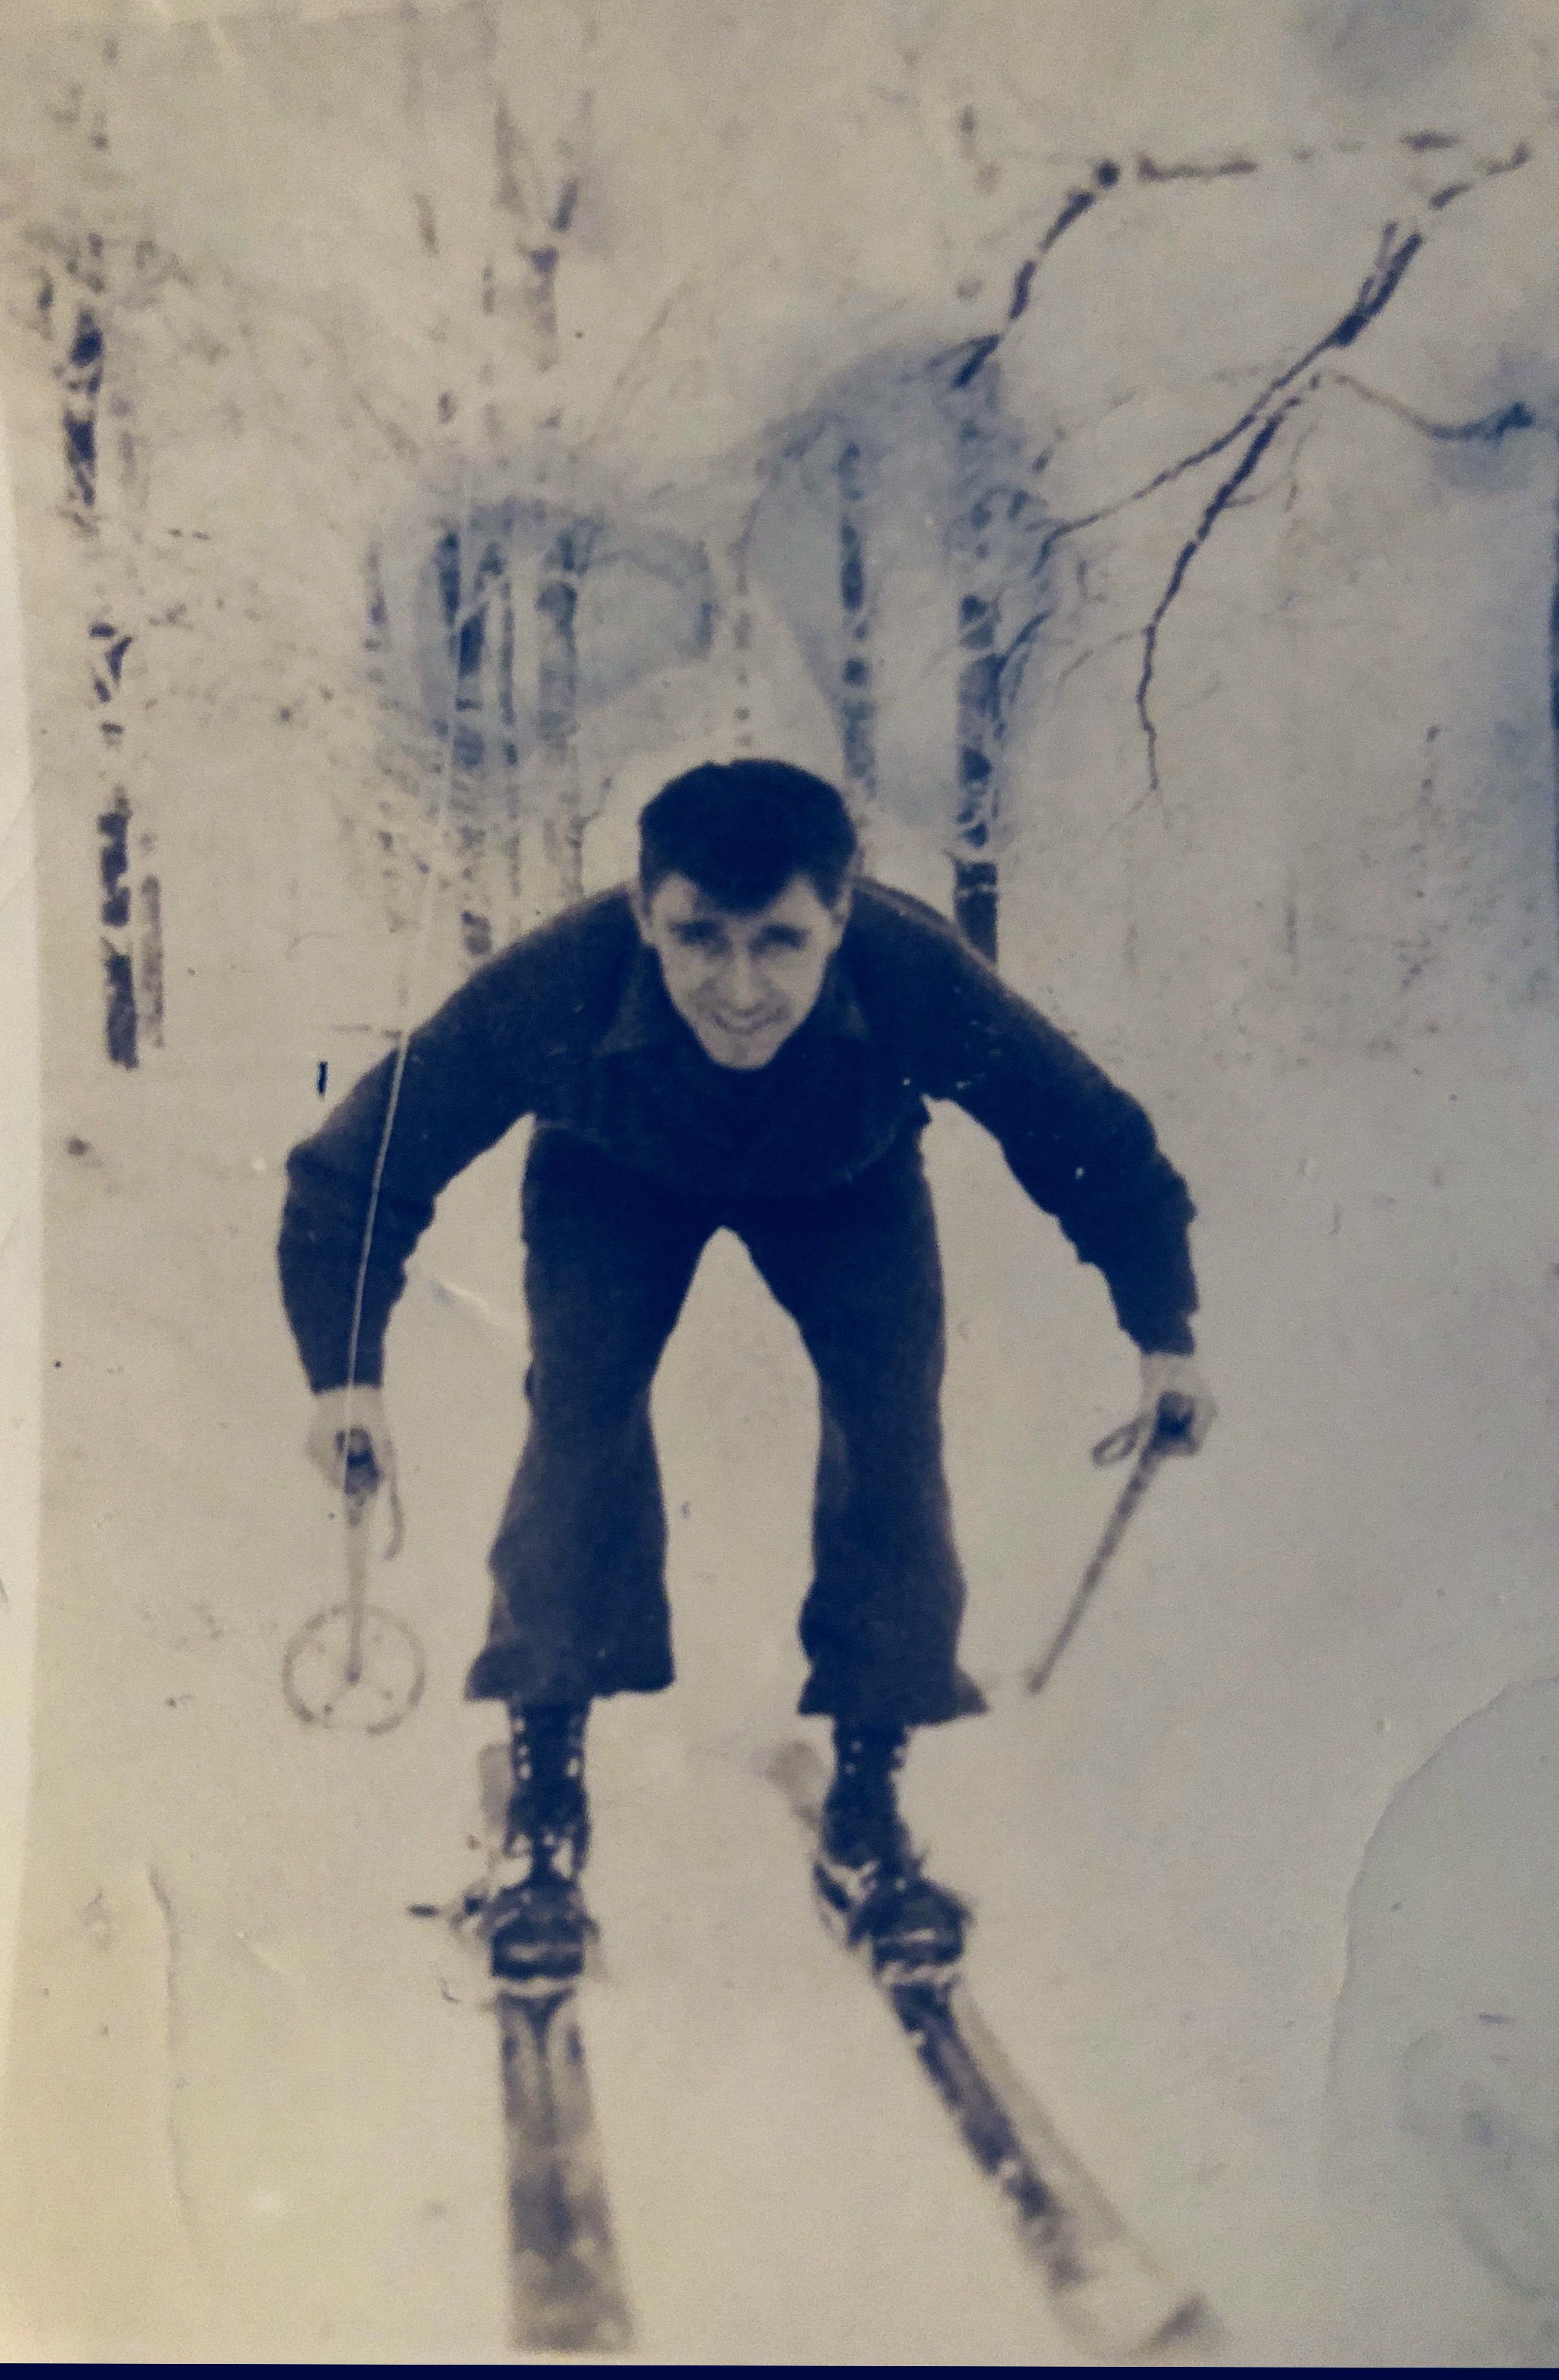 Grandfather posing like a PRO on his skiis from what i was told it was during his time overseas not sure if it was Germany but one of the countries during world war 2 but in that timeline 